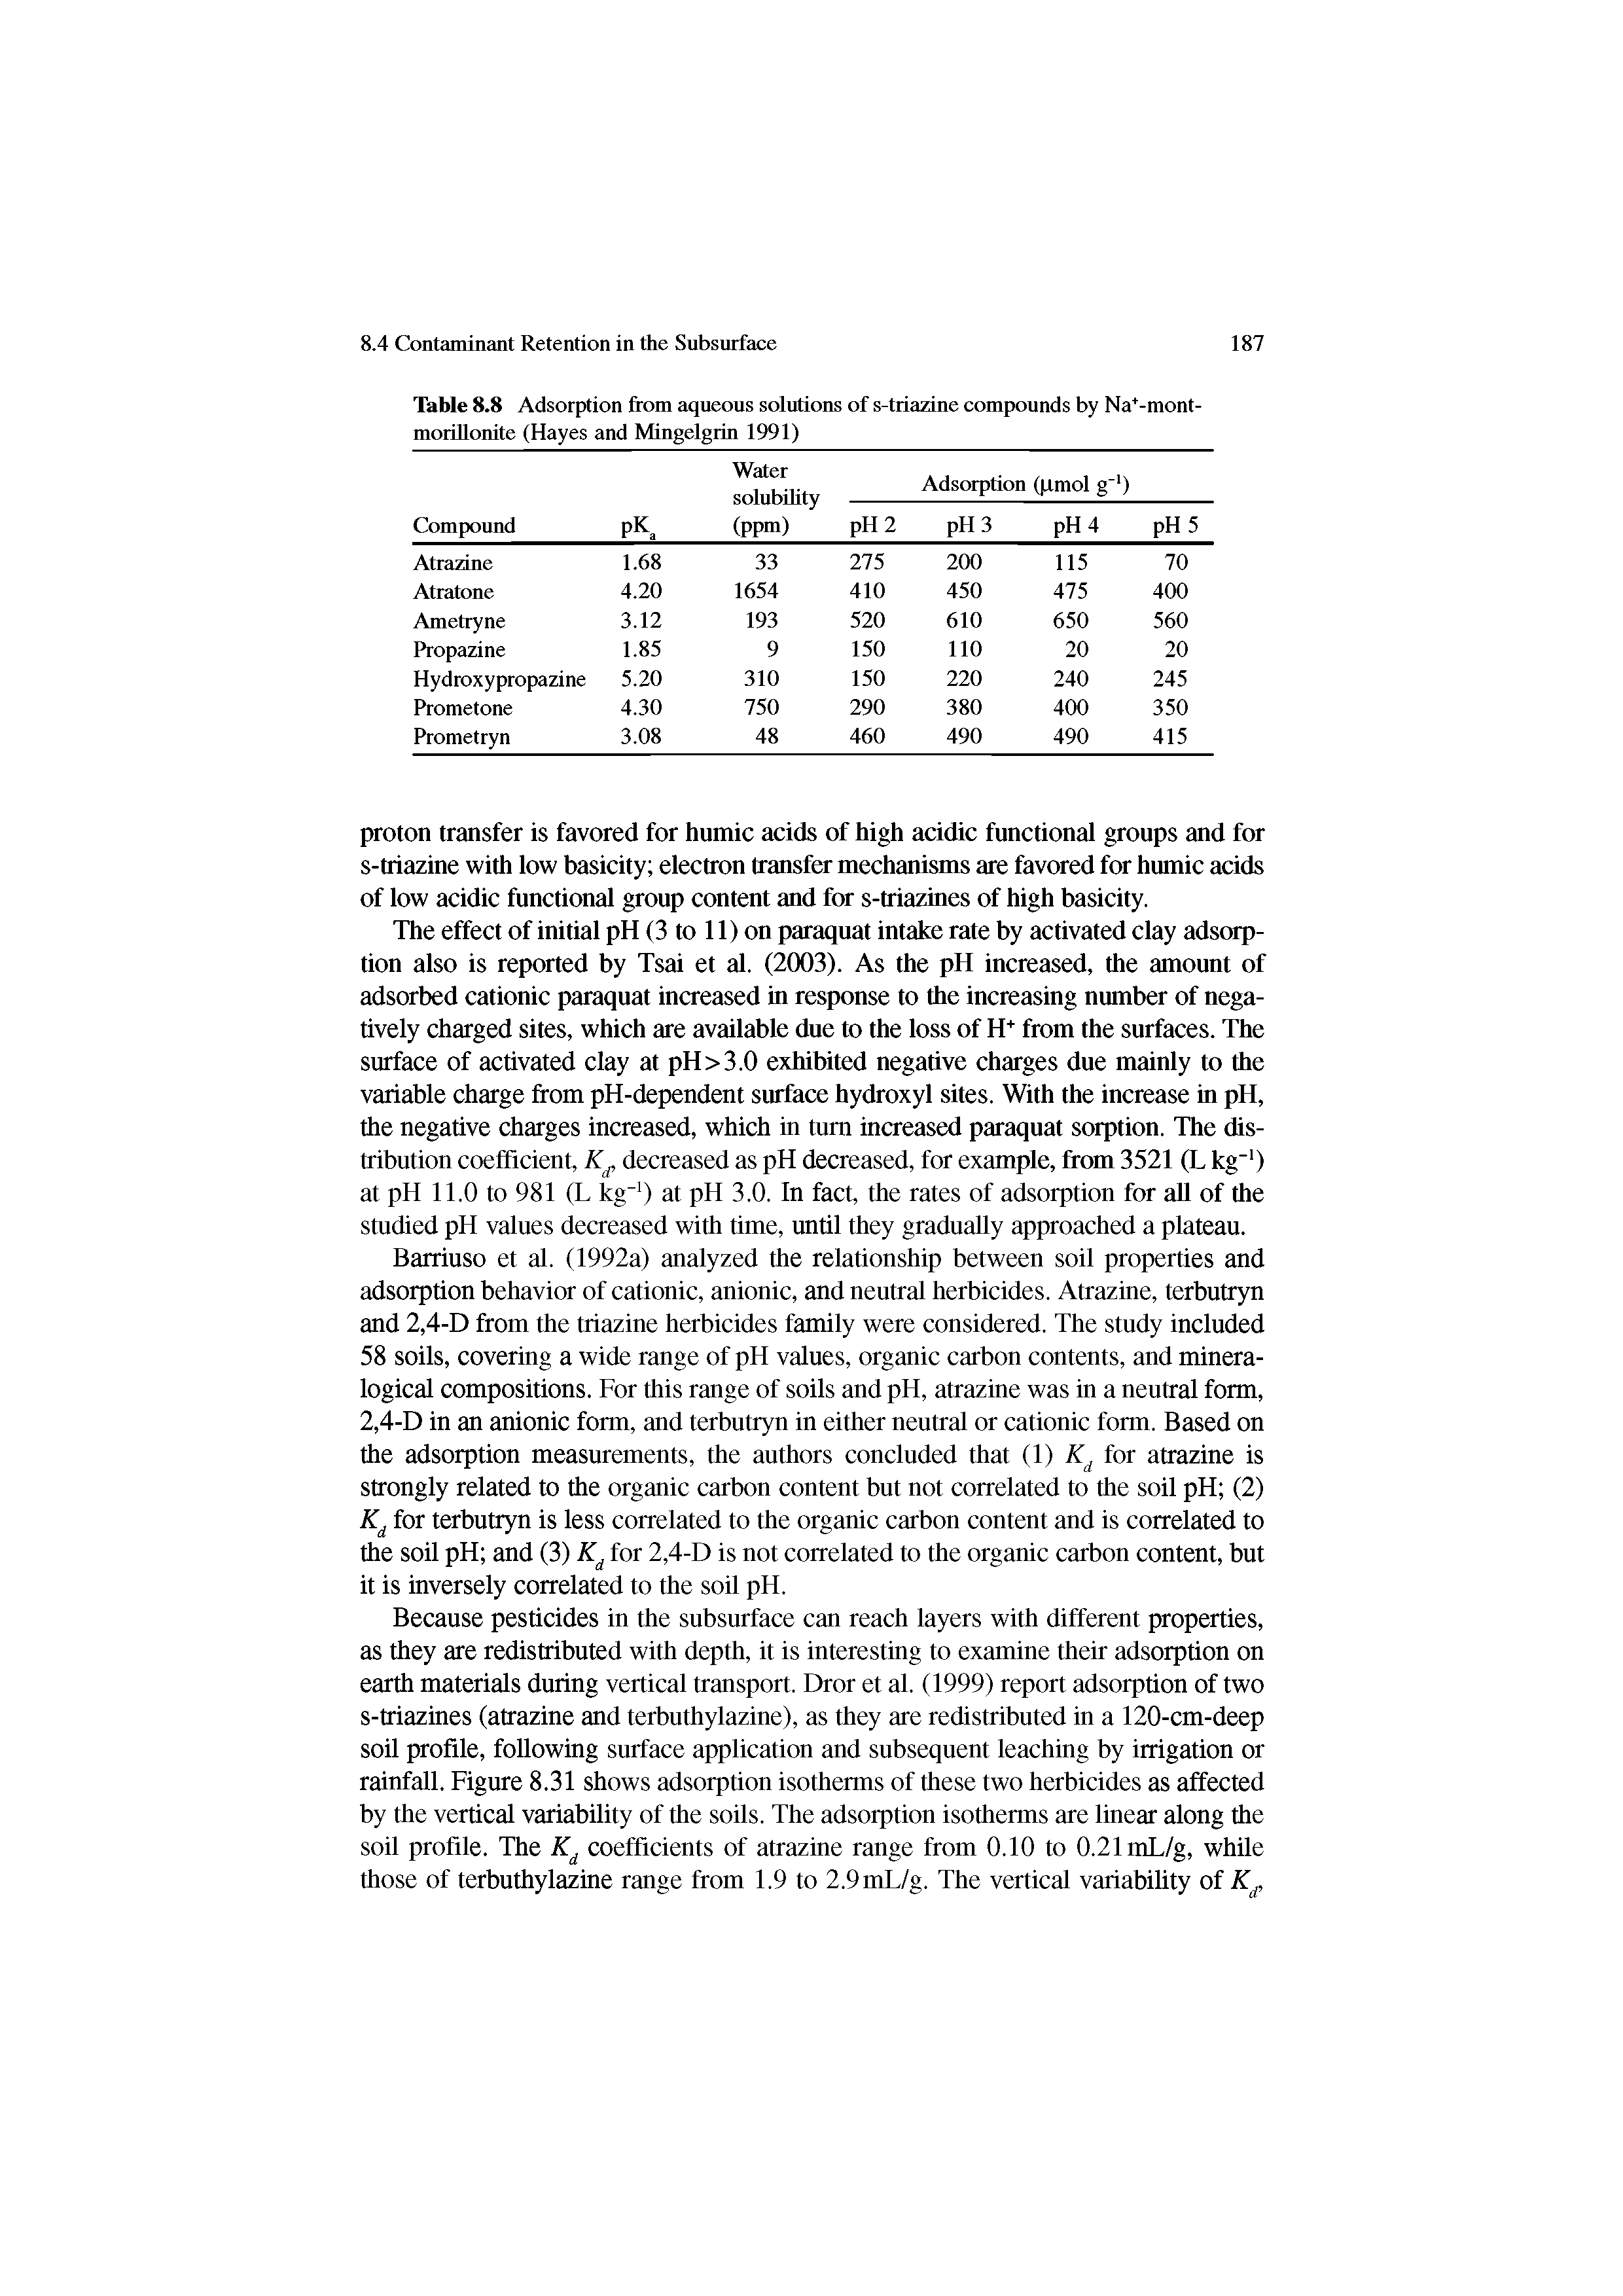 Table 8.8 Adsorption from aqueous solutions of s-triazine compounds by Na -mont-morillonite (Hayes and Mingelgrin 1991)...